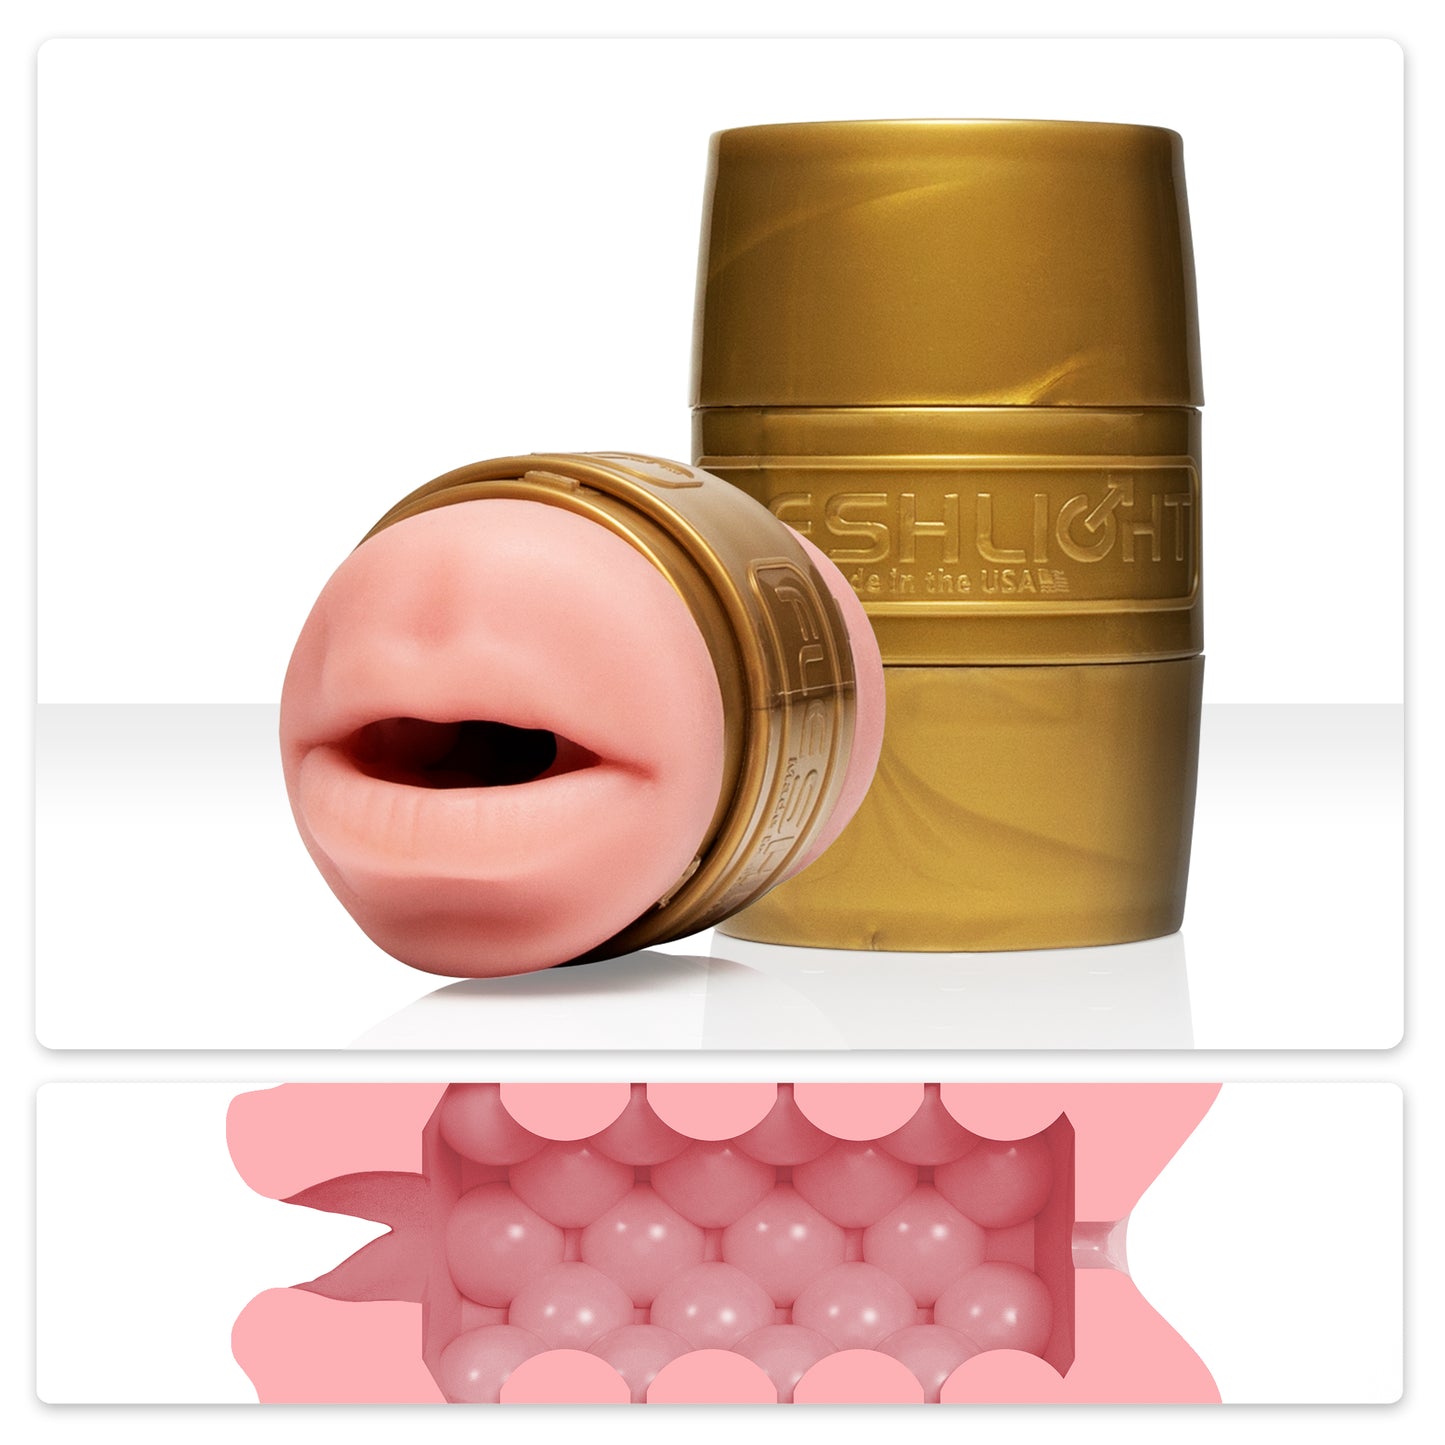 The Mouth and Butt Fleshlight Quickshot with a cross cut image of the insides underneath it.